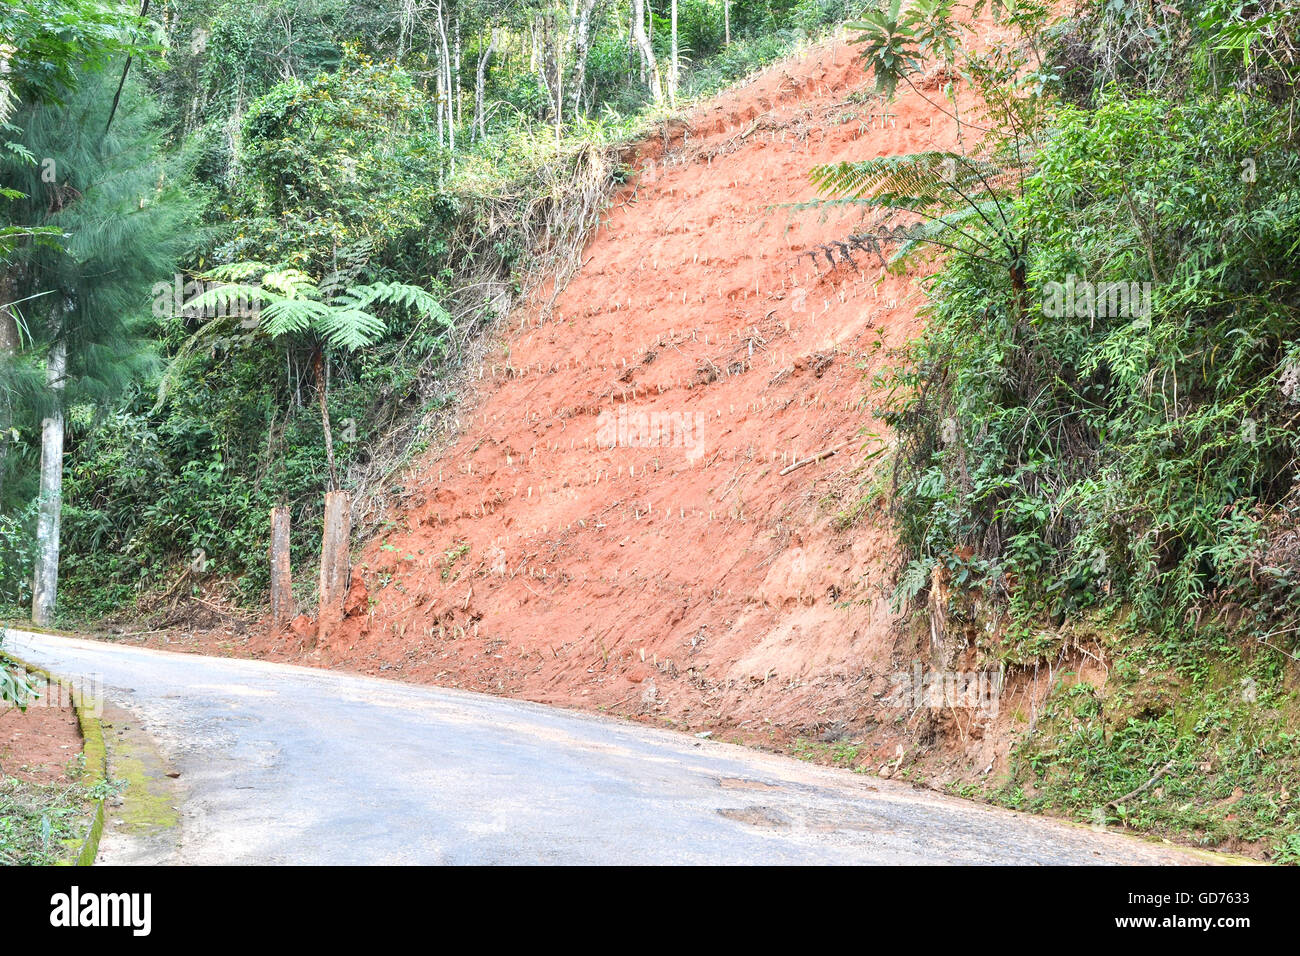 Erosion on the side of a road in Petropolis, Brazil, as the result of deforestation Stock Photo